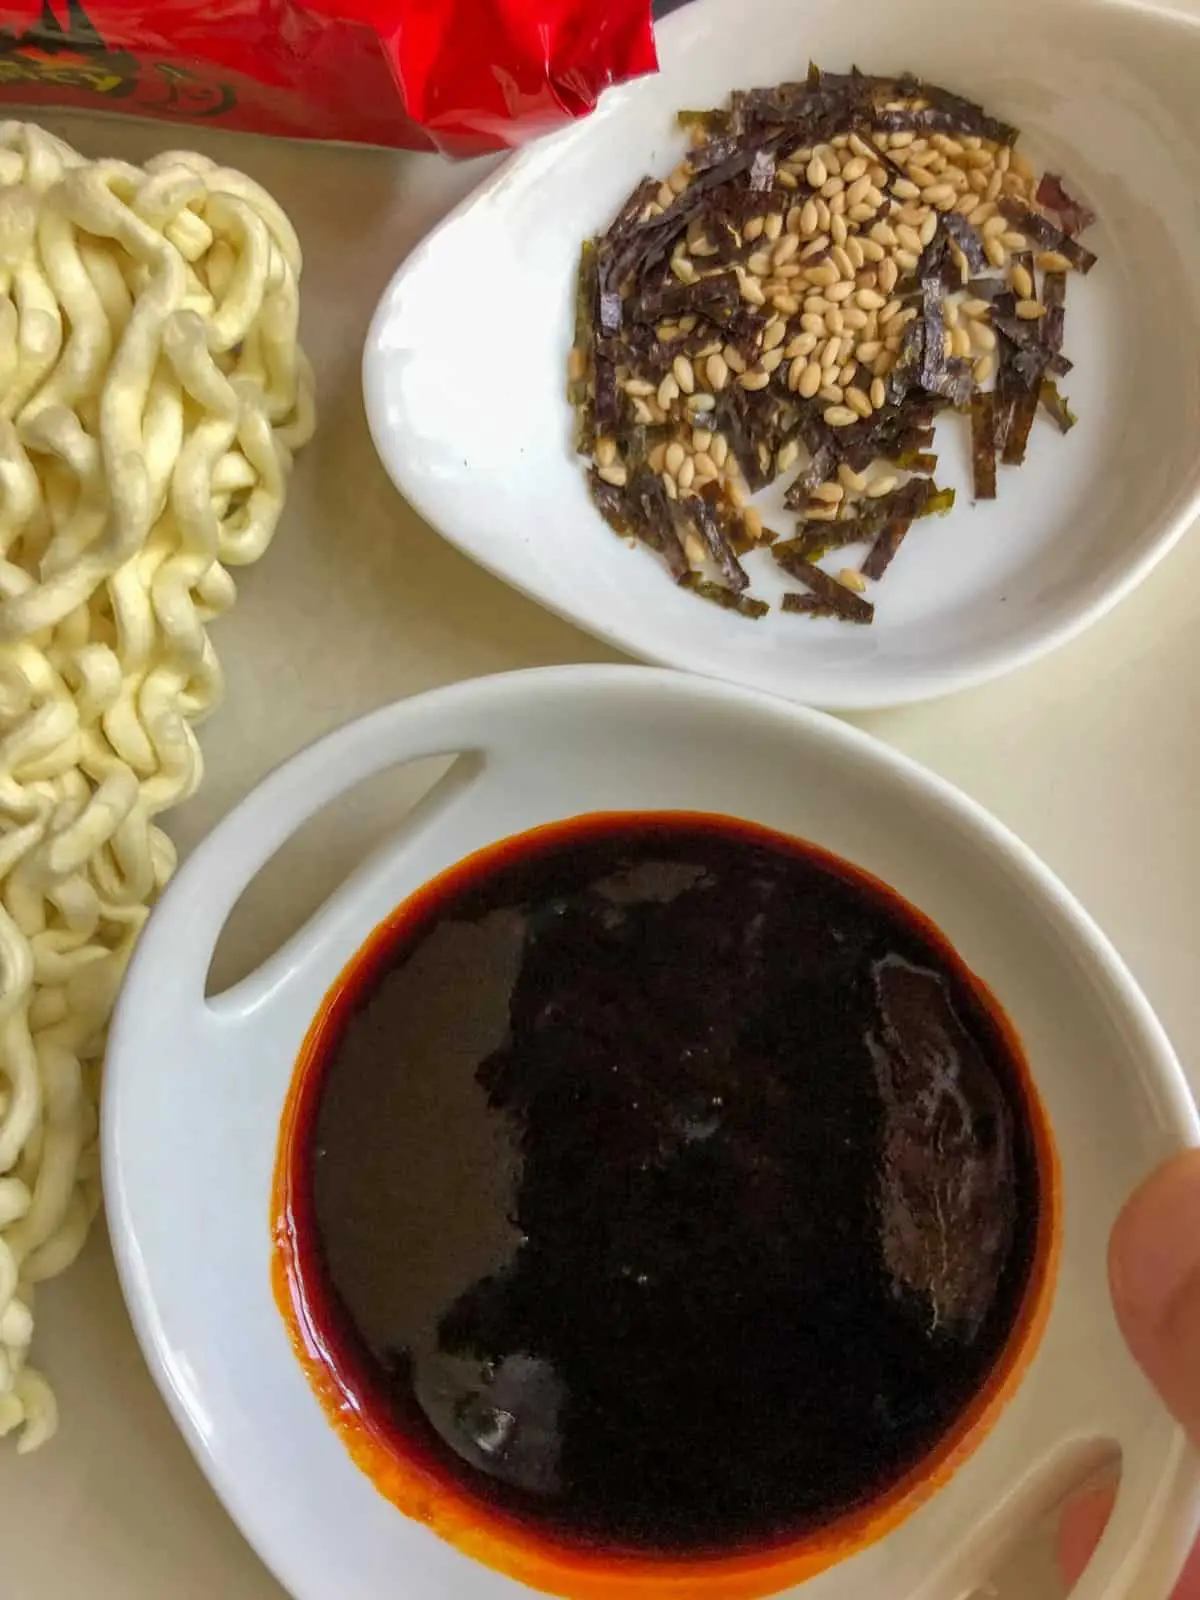 Some noodles, red packaging, seaweed and sesame seeds in a white dish, and a spicy sauce in a white bowl.